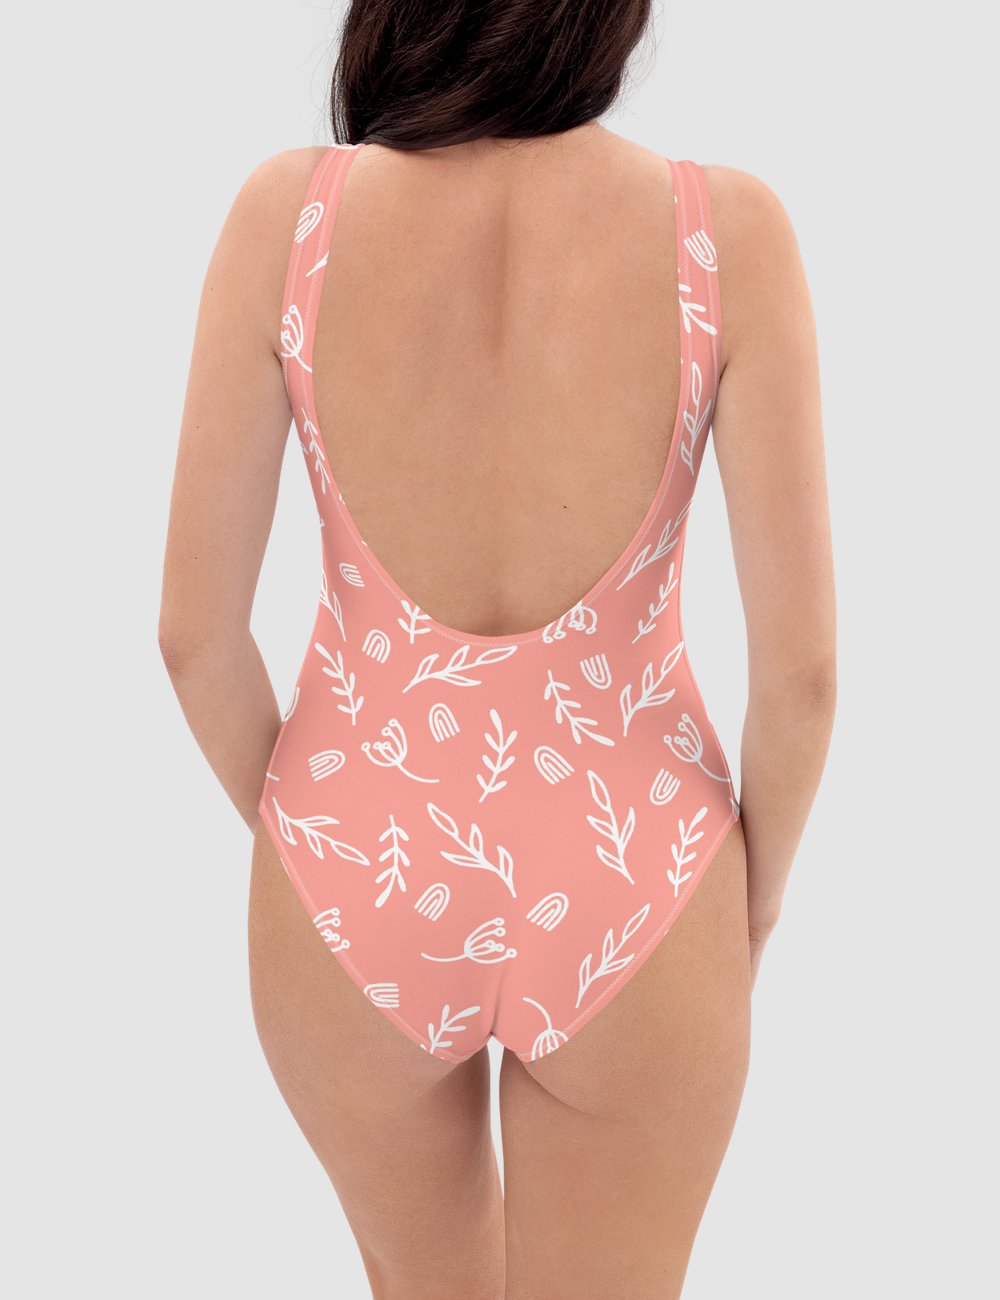 Abstract Boho Rose Bud Floral Pattern | Women's One-Piece Swimsuit OniTakai